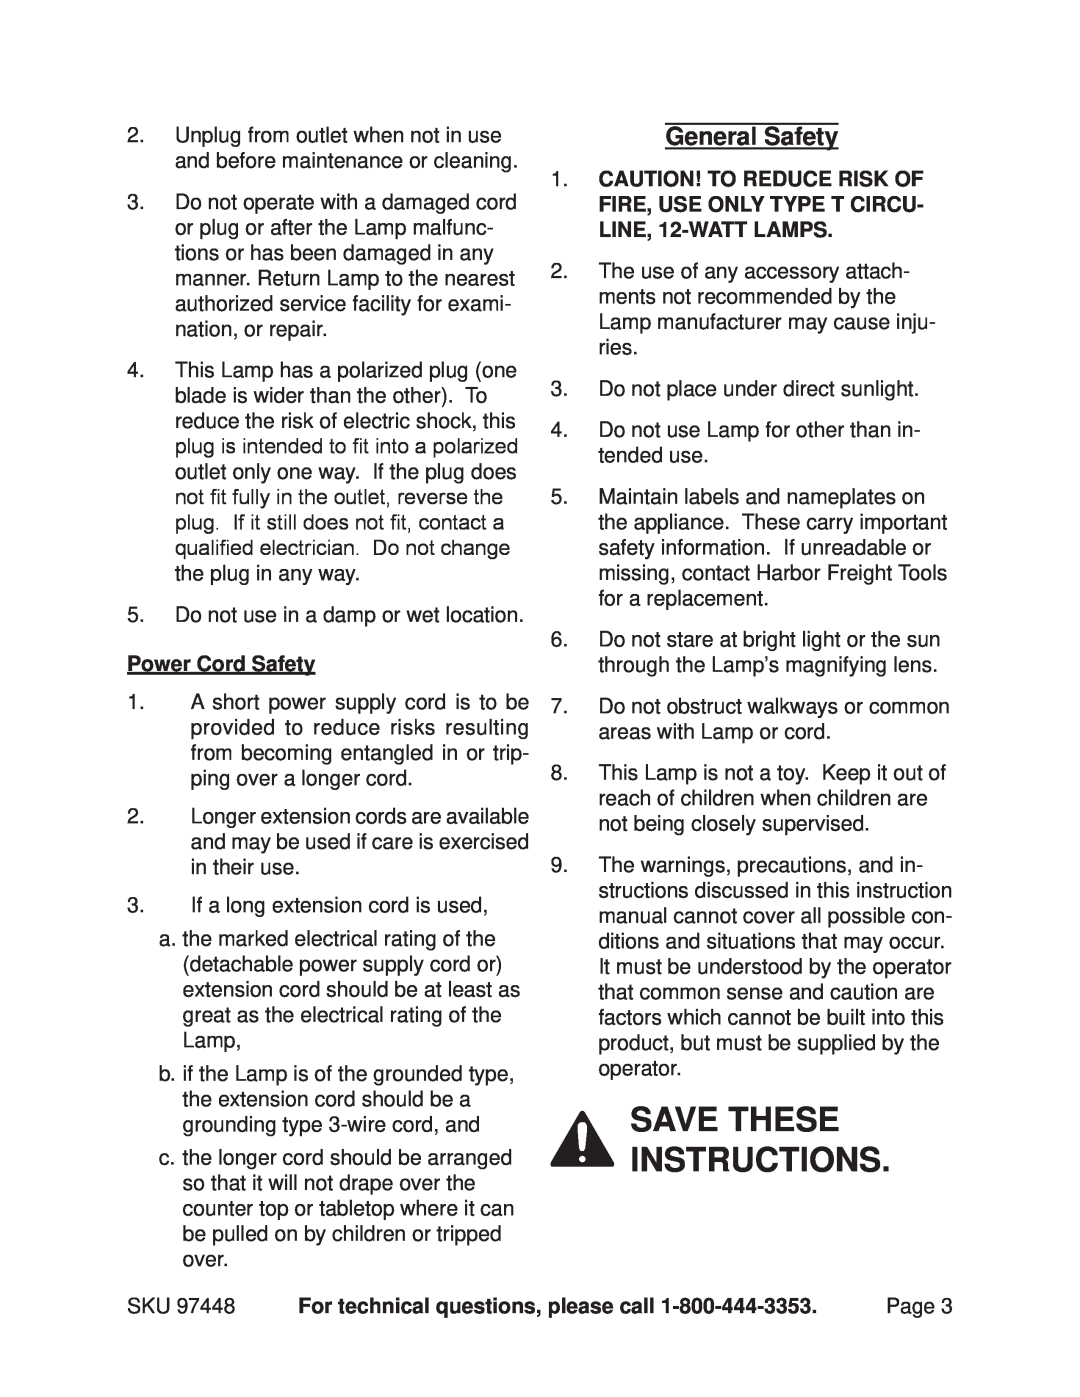 Chicago Electric 97448 Save these instructions, General Safety, Power Cord Safety, For technical questions, please call 